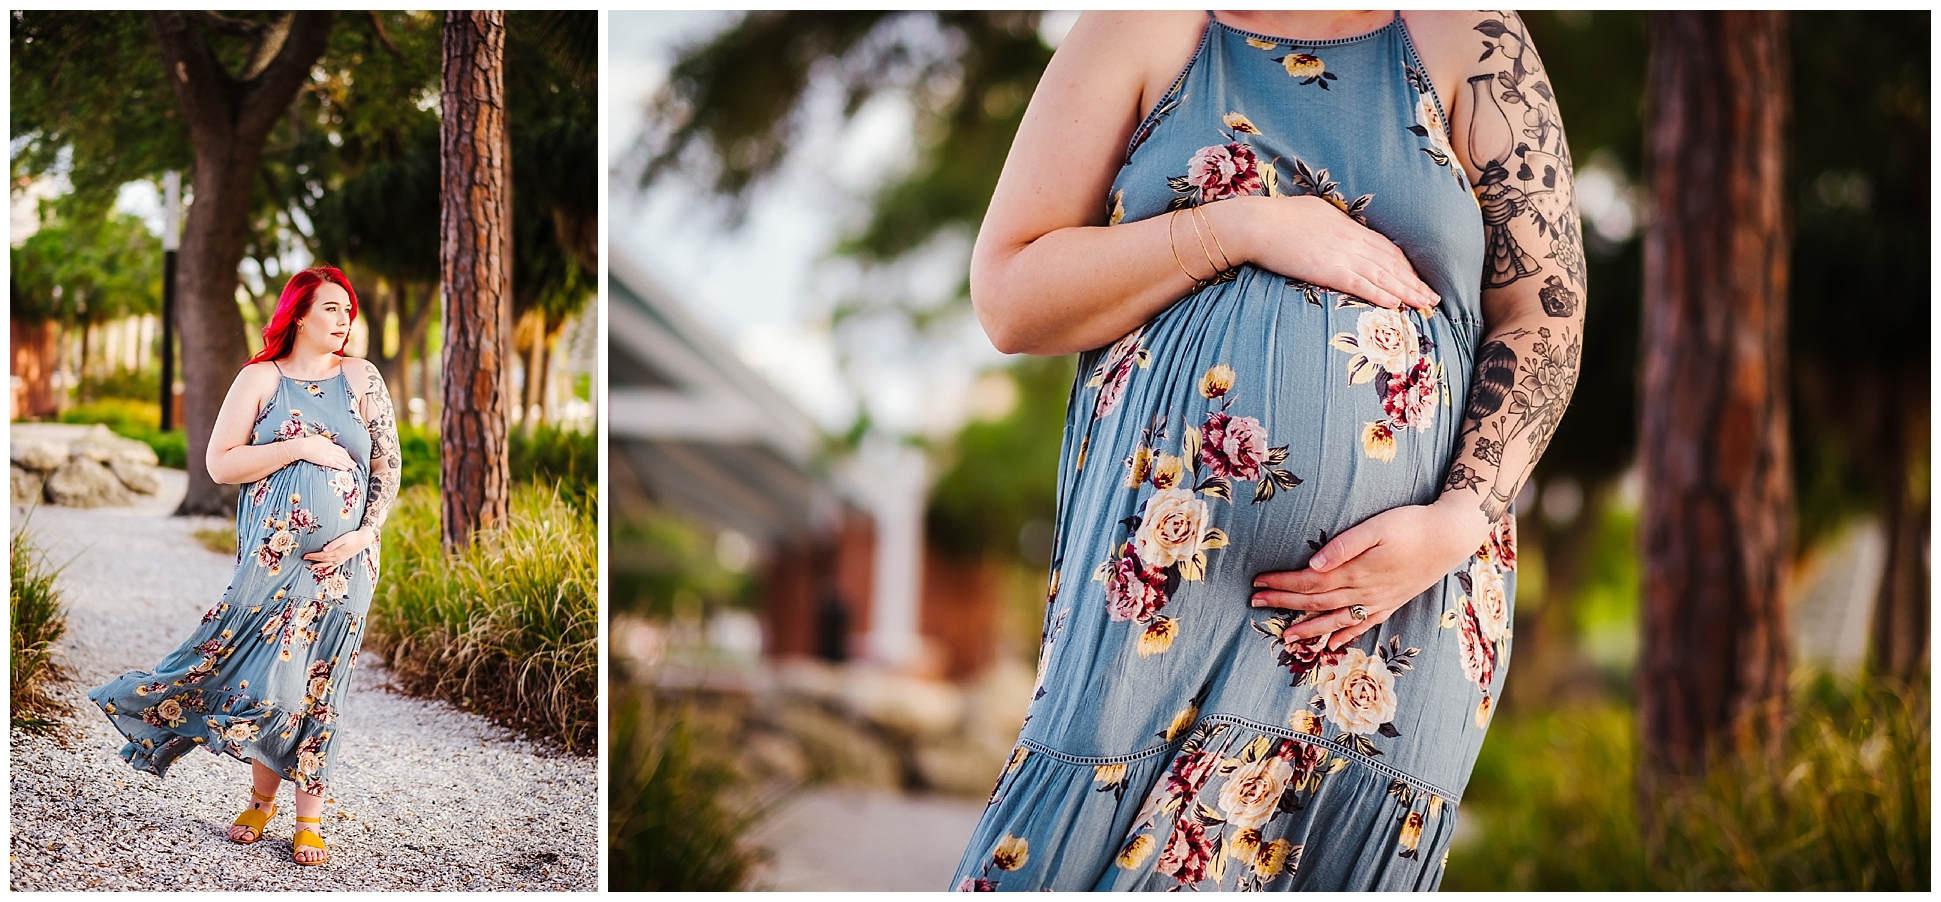 tampa-rad red-maternity-floral dress-armature works-rialto theater_0022.jpg